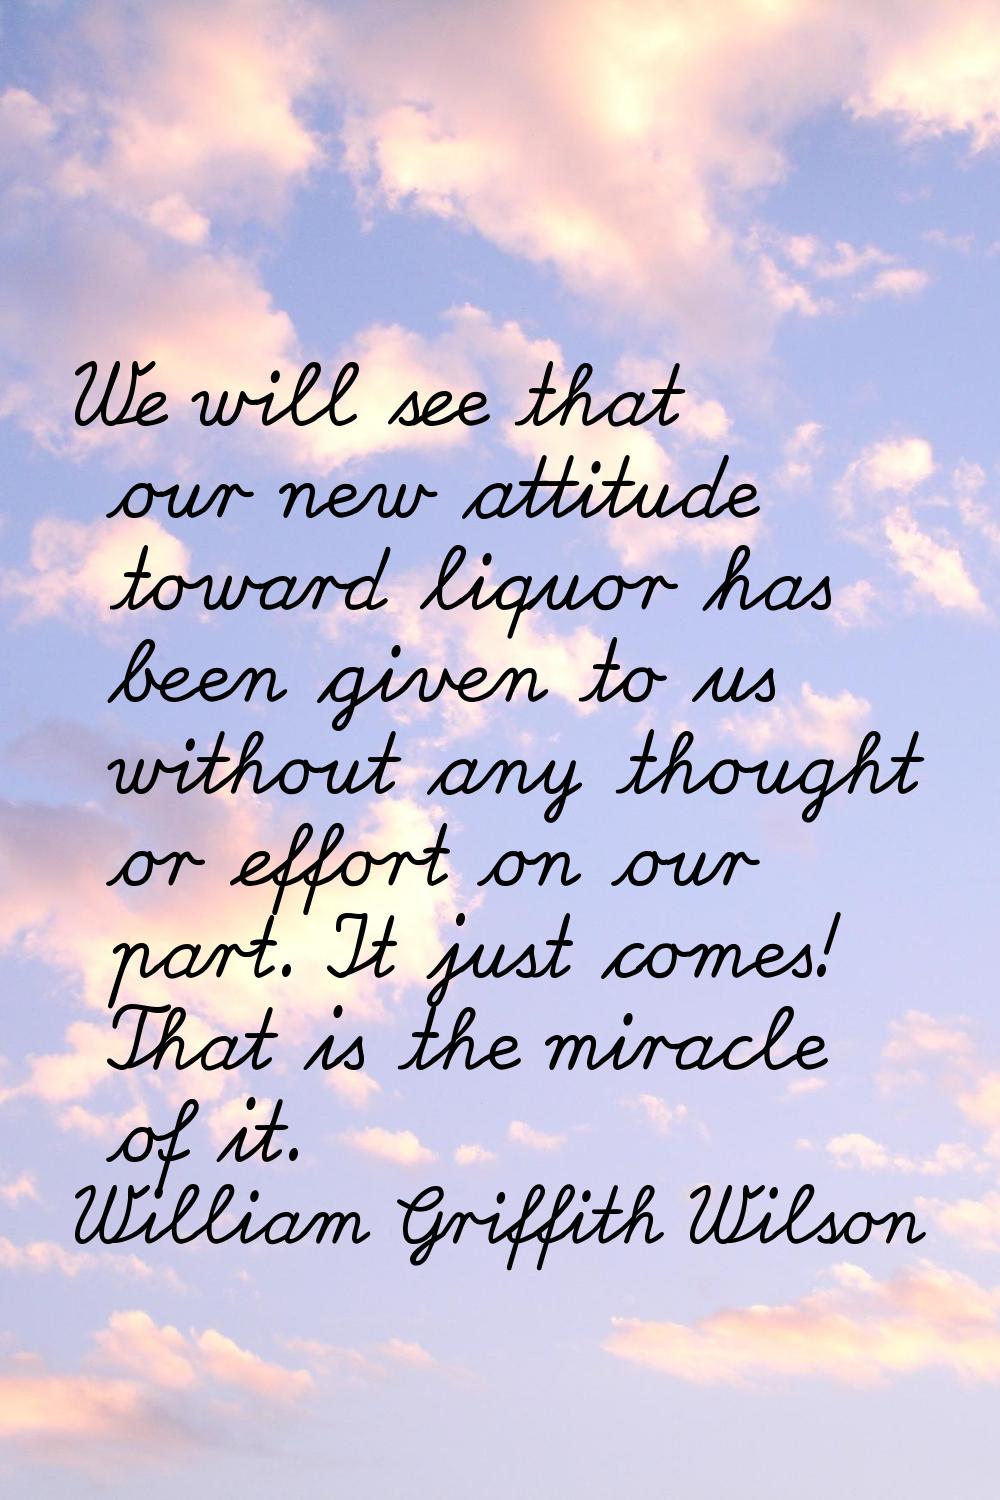 We will see that our new attitude toward liquor has been given to us without any thought or effort 